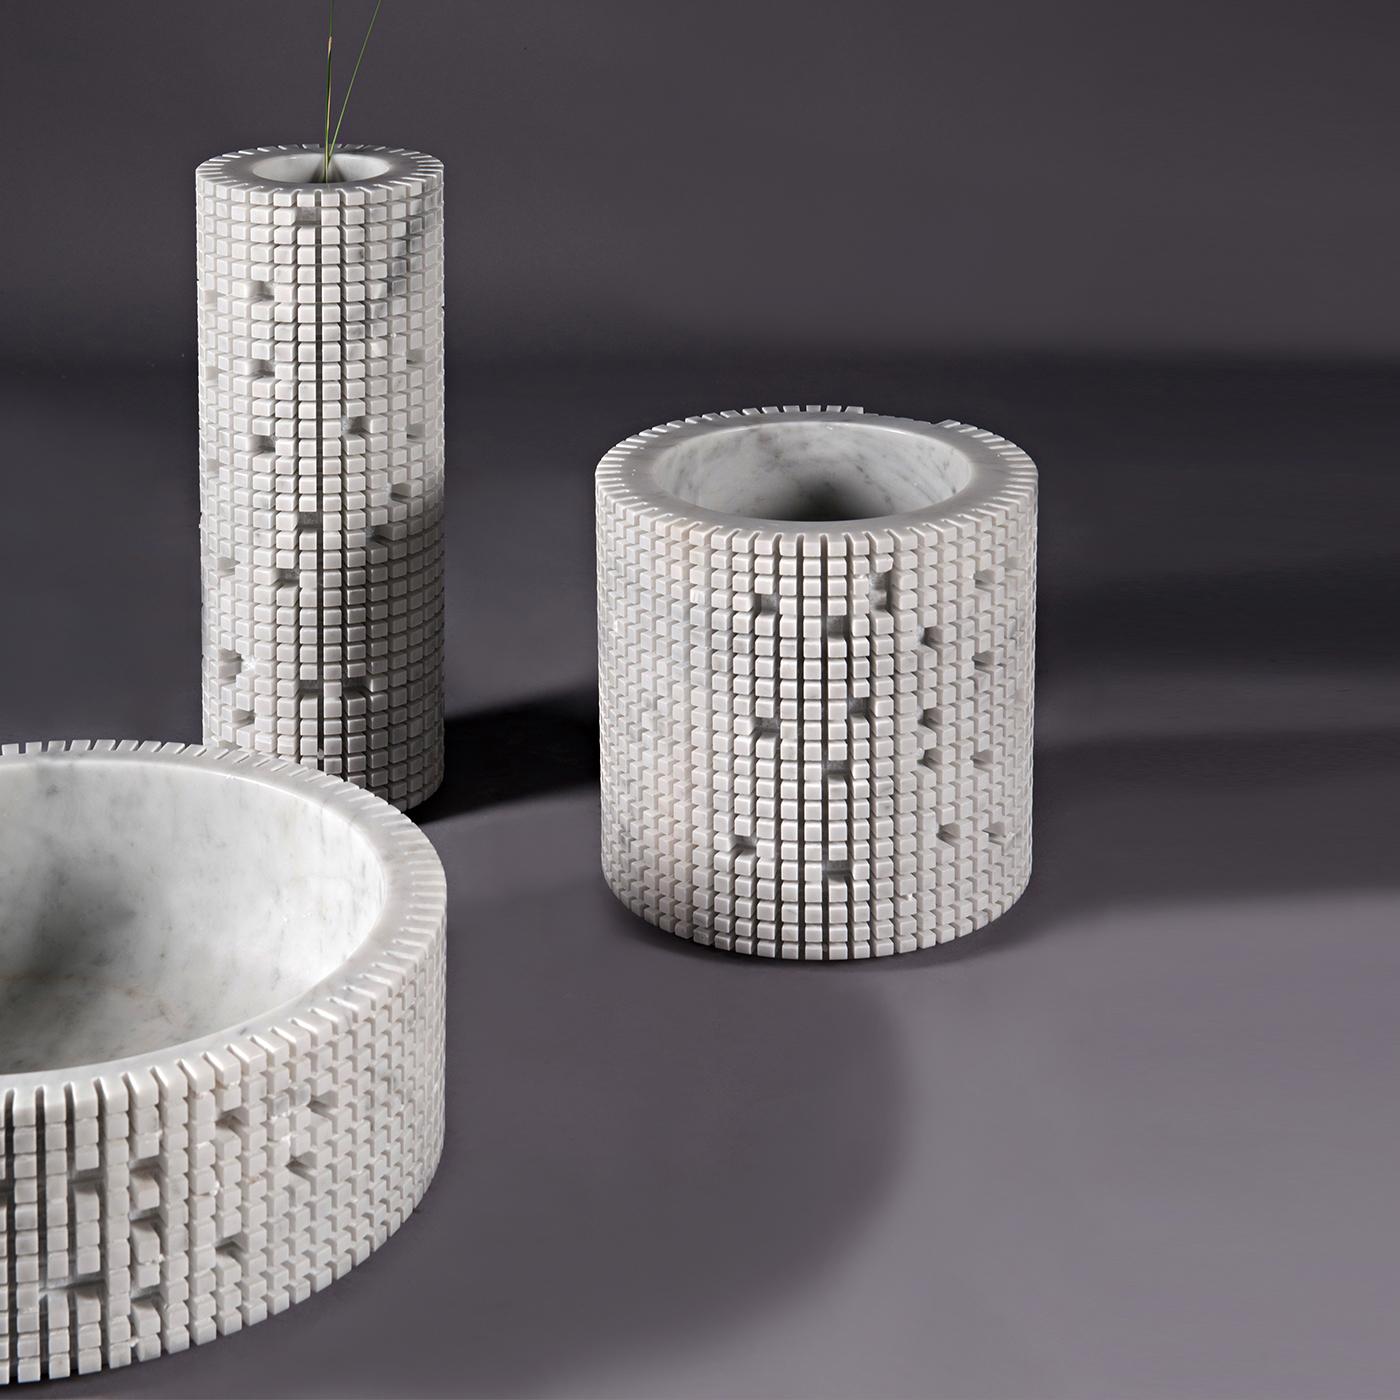 The medium-sized version of the Pixel design in white Carrara marble. Paolo Ulian used a single block to form the tall slim circular shape of the body and create the pixelated exterior that can be either kept or personalized by breaking off